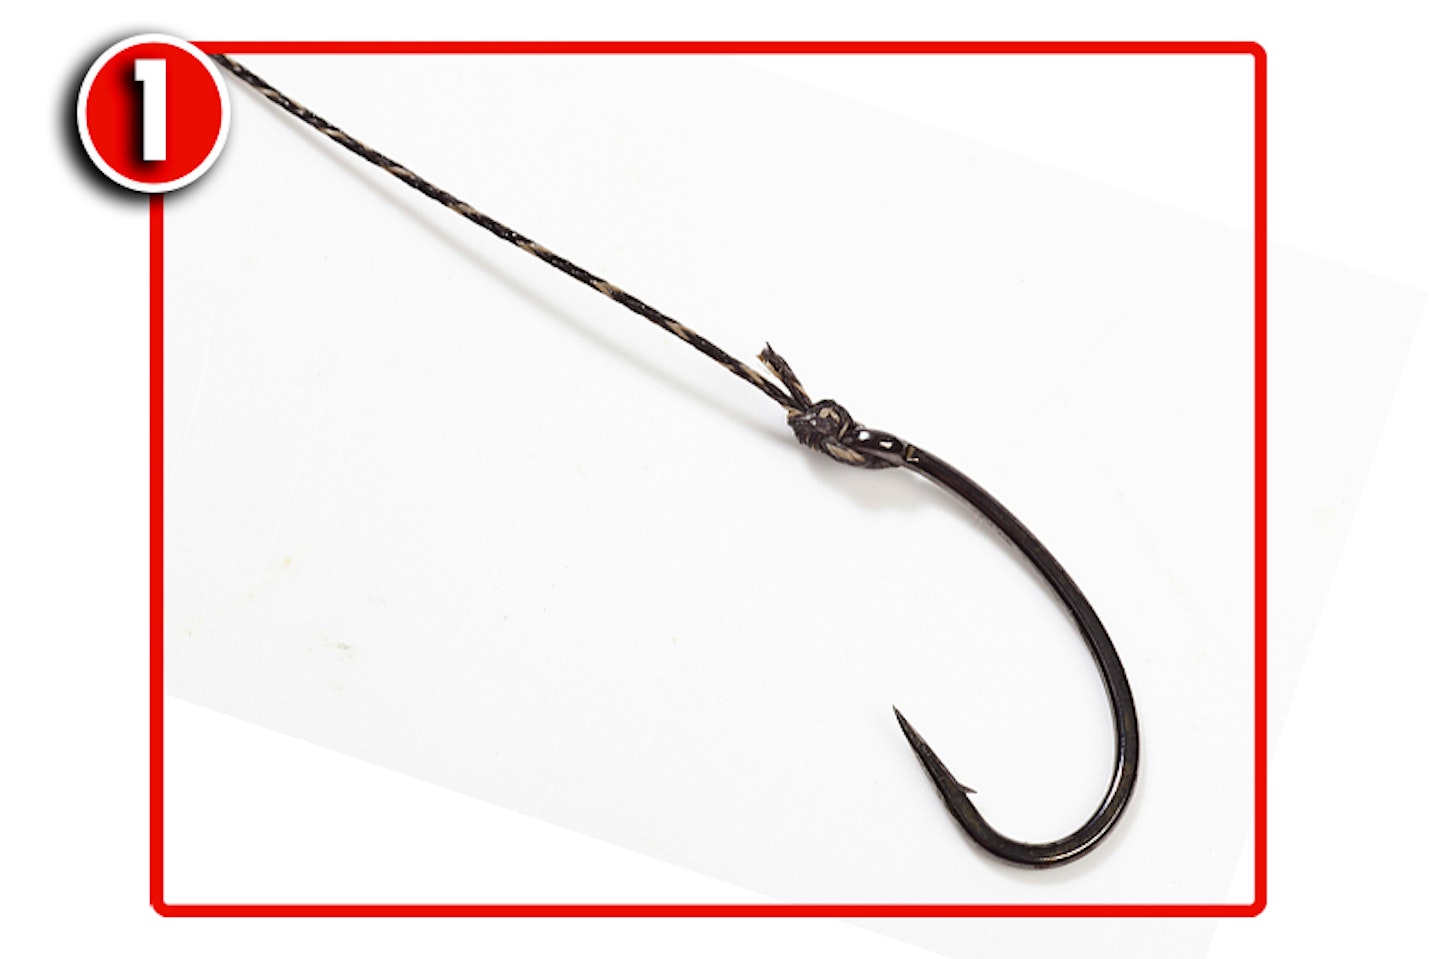 Tie on a curved shank hook. We’ve used a palomar knot here, but a grinner is also fine to use.